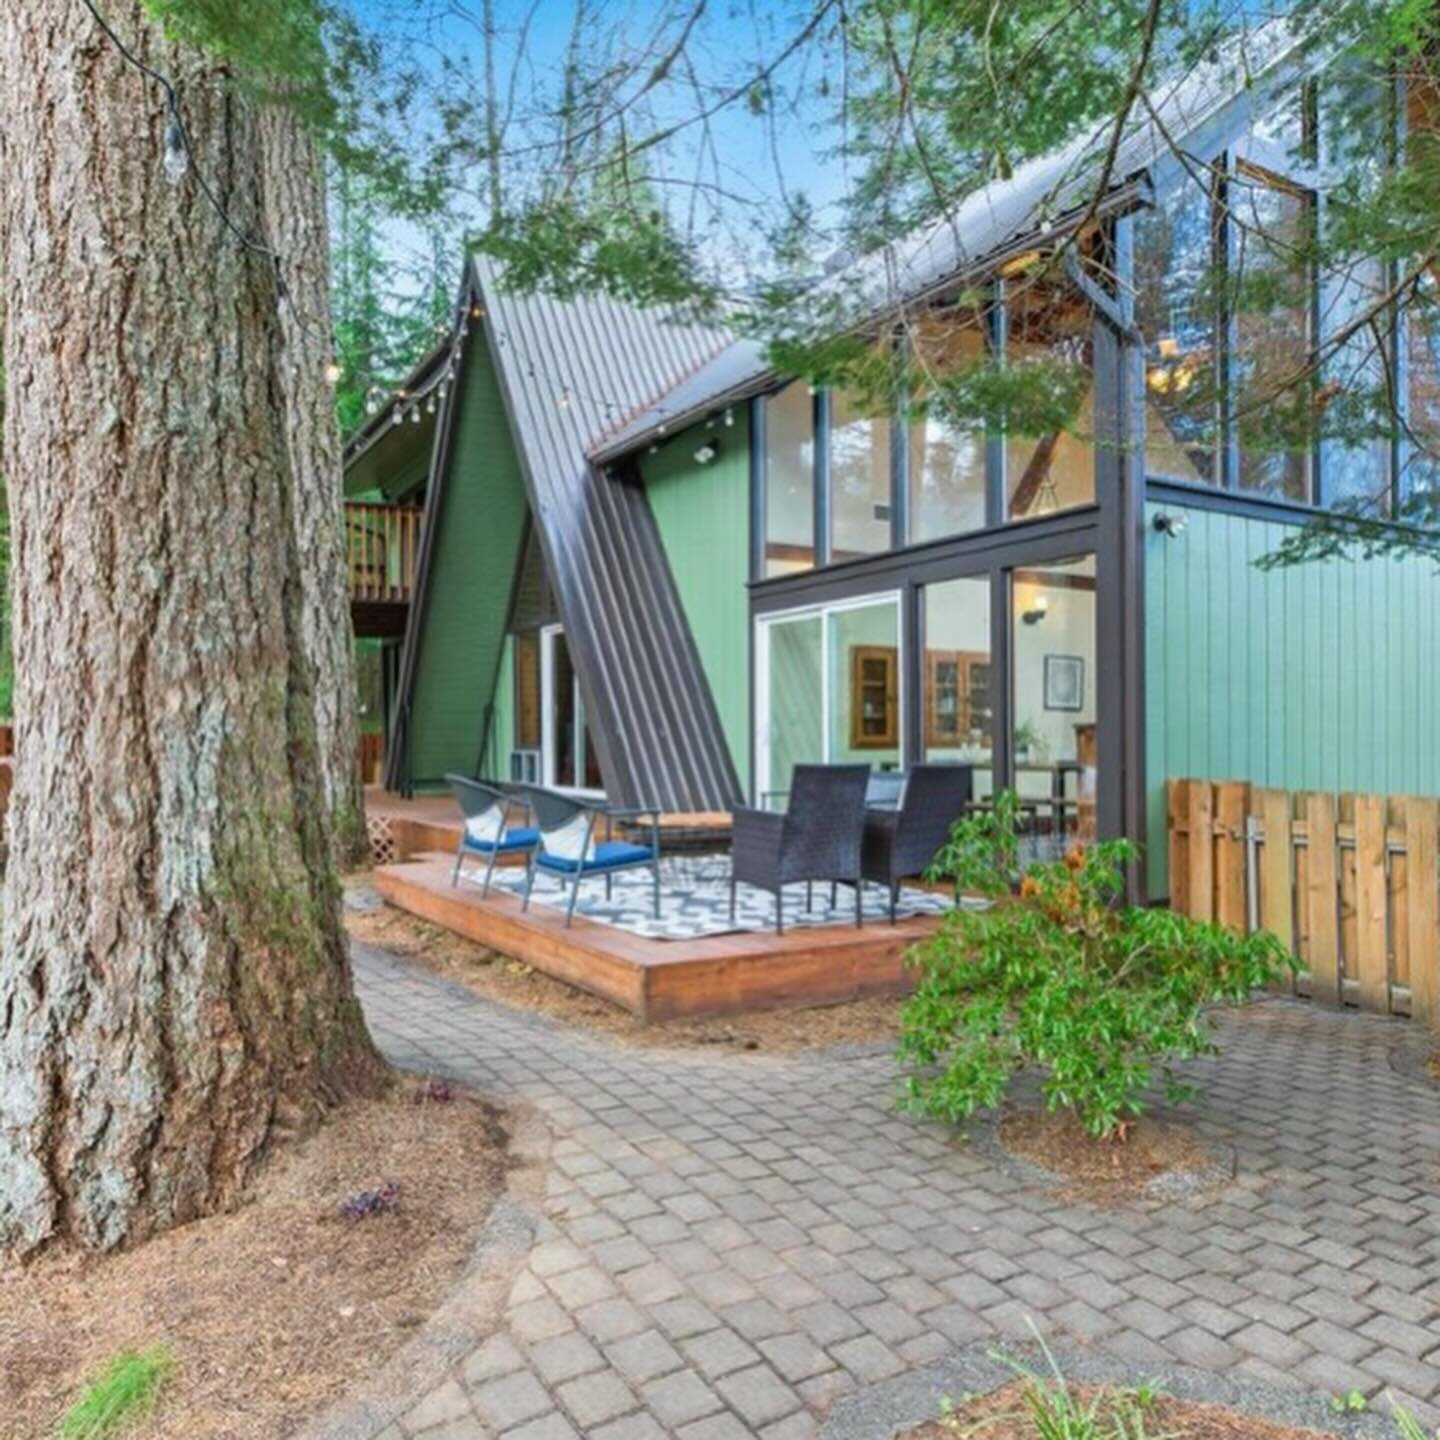 Passed my WA broker exam today, so naturally needed to share this spot right ON THE WASHOUGAL!

&ldquo;This charming cabin seamlessly blends rustic charm with modern amenities, offering a unique &amp;  tranquil living experience. This home is a true 